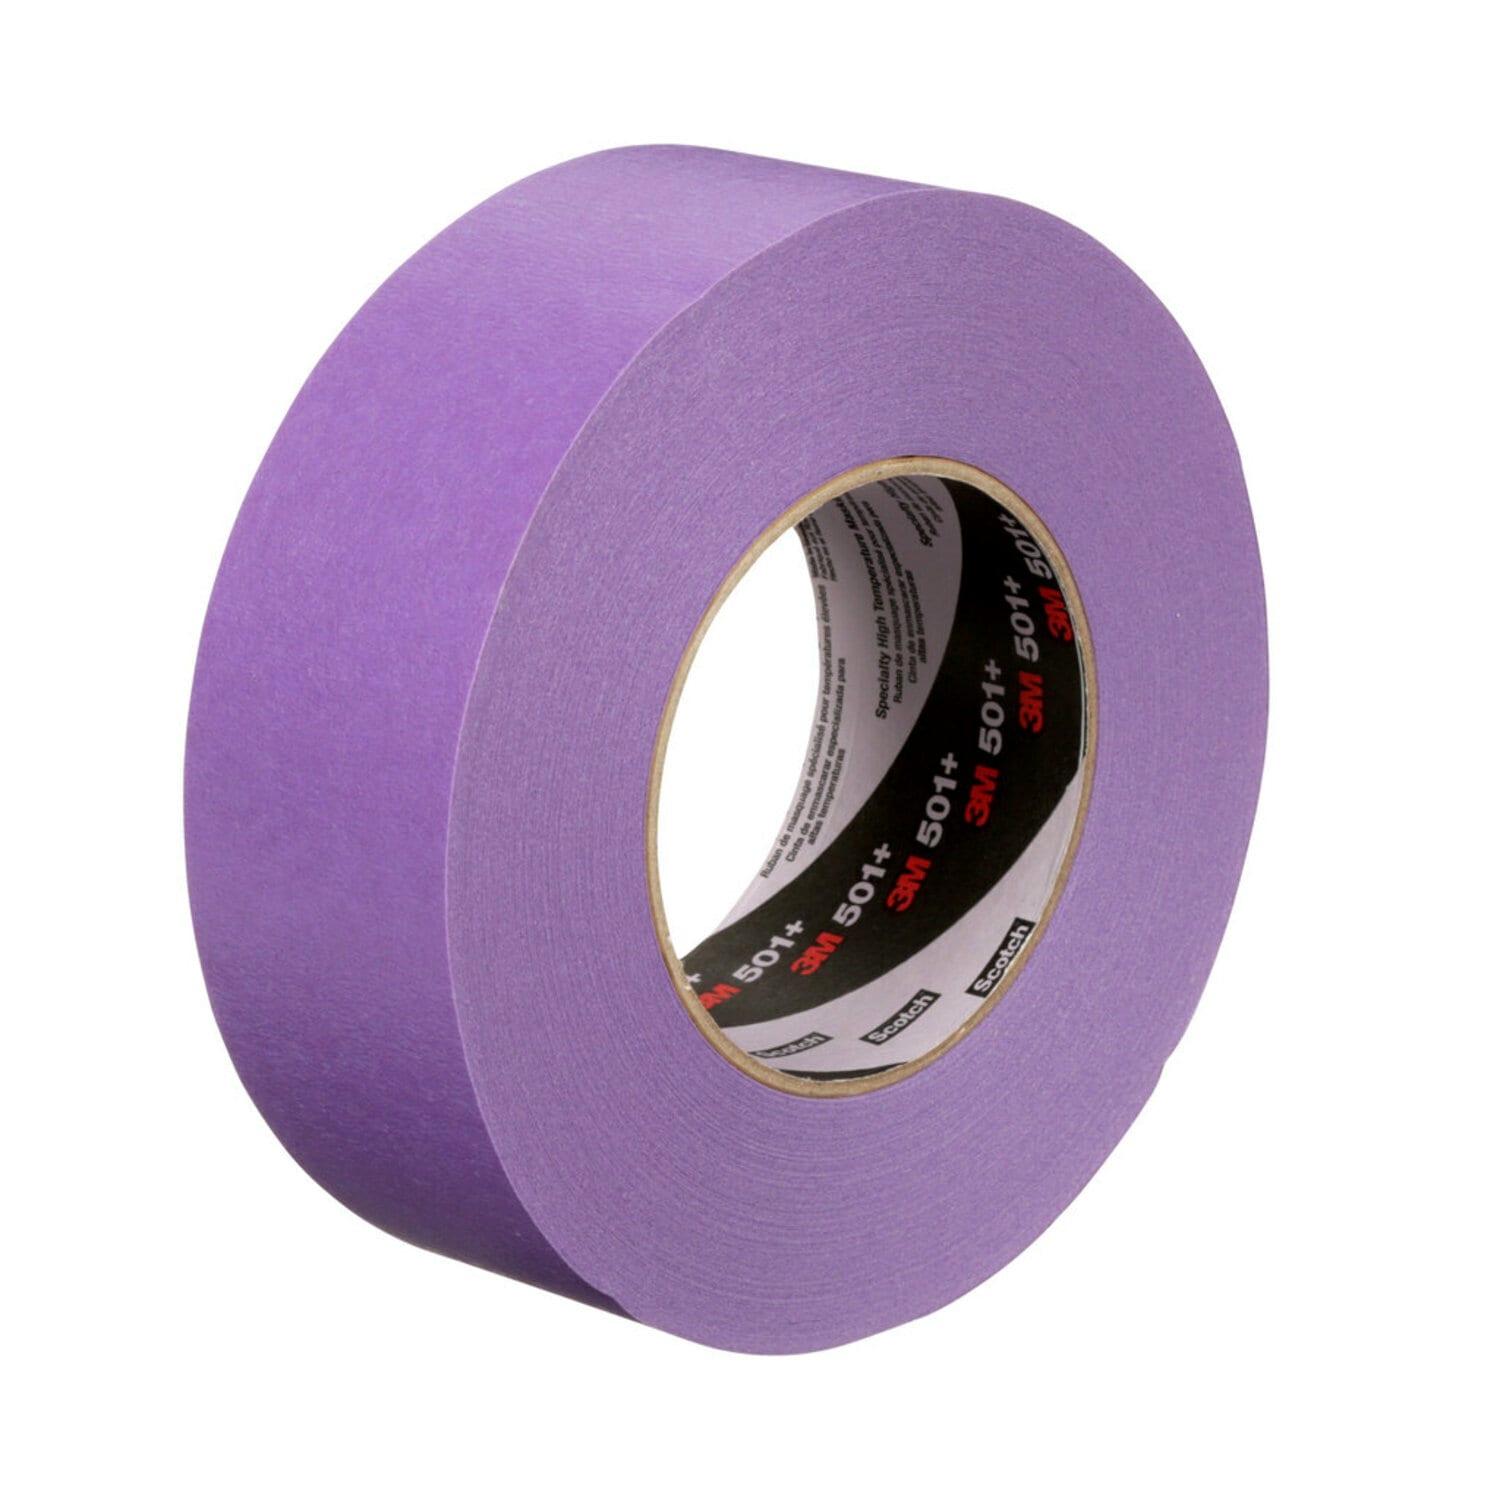 7100133102 - 3M Specialty High Temperature Purple Masking Tape 501+, Roll, Config